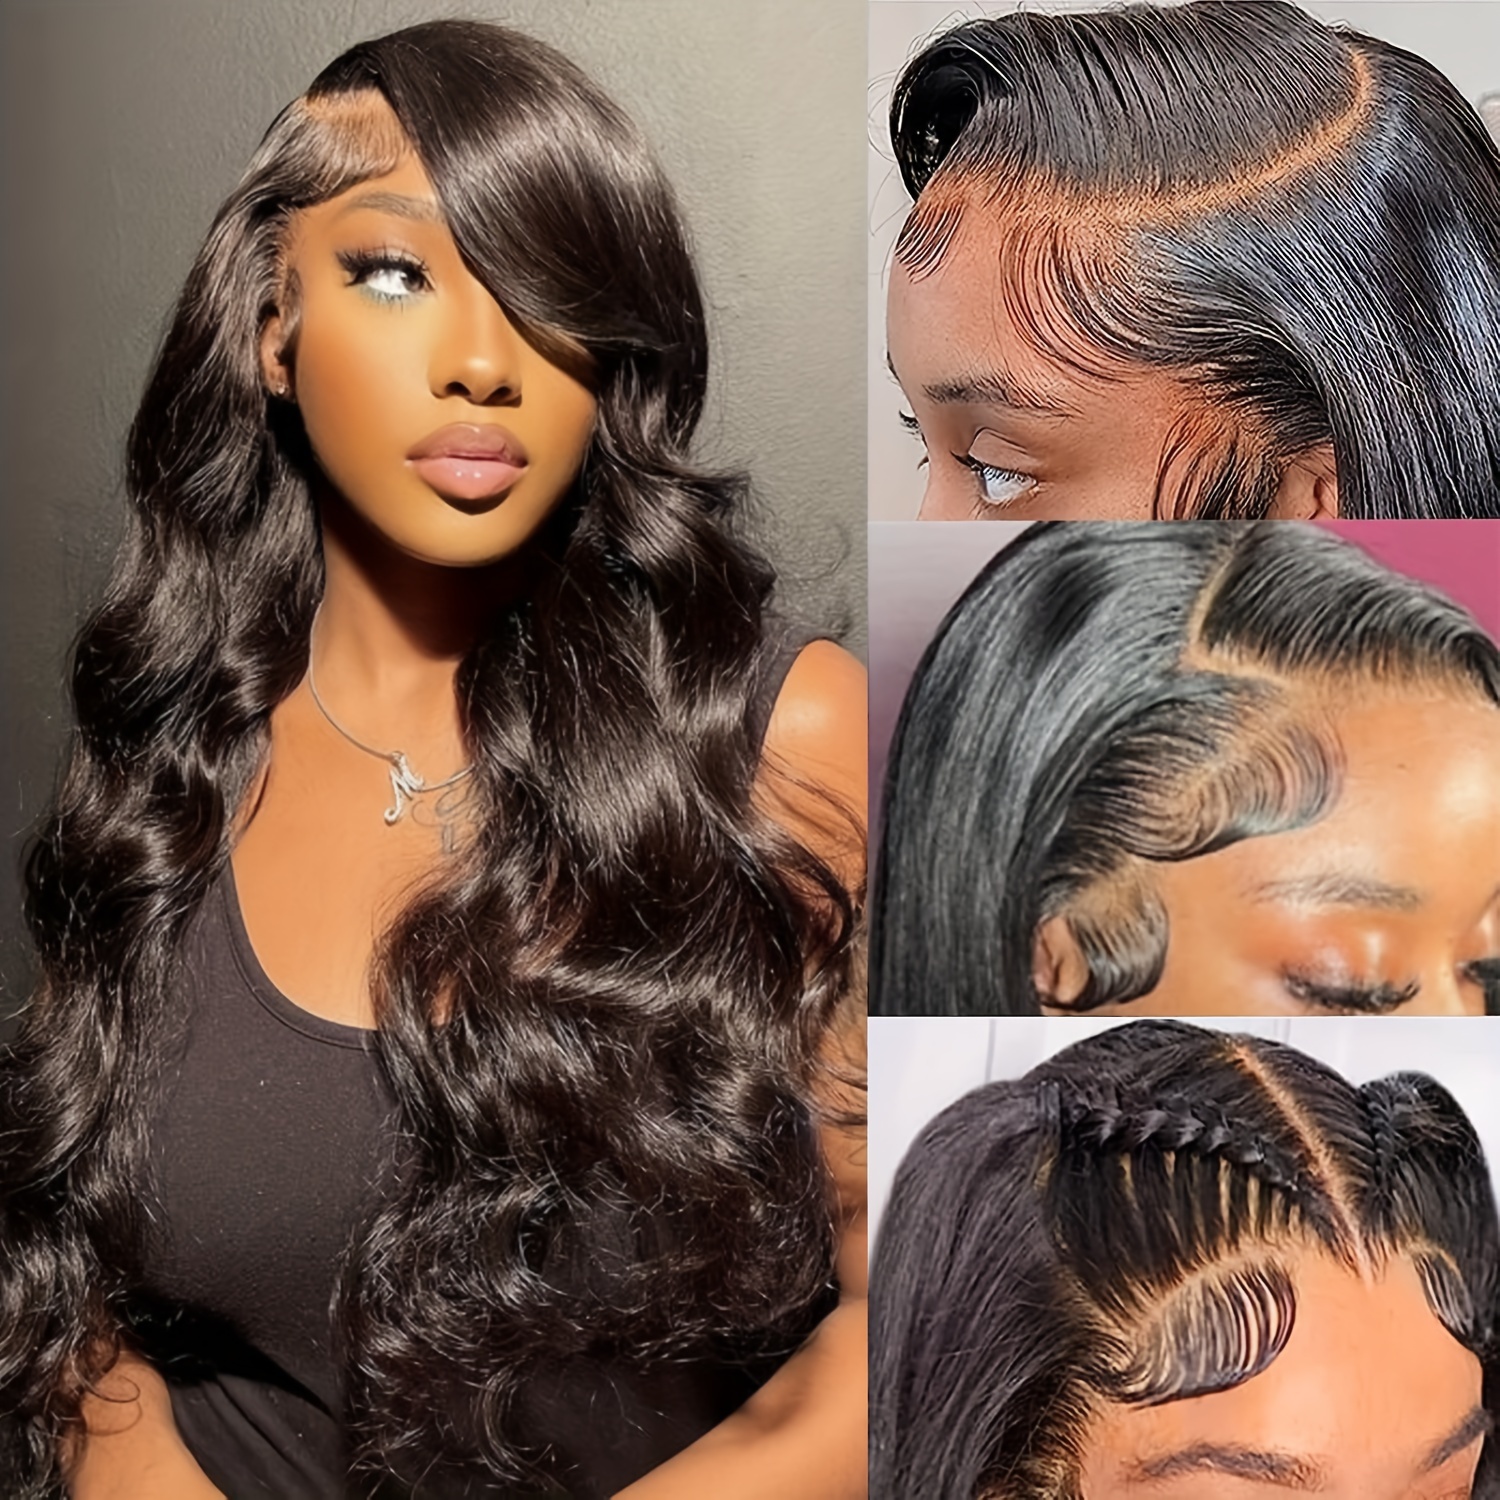  GUSYBG body wave 13x6 hd lace front wig wet and wave lace  front wigs wig products bob frontal wig lace tent for frontal bonding glue  for lace wigs  outlets